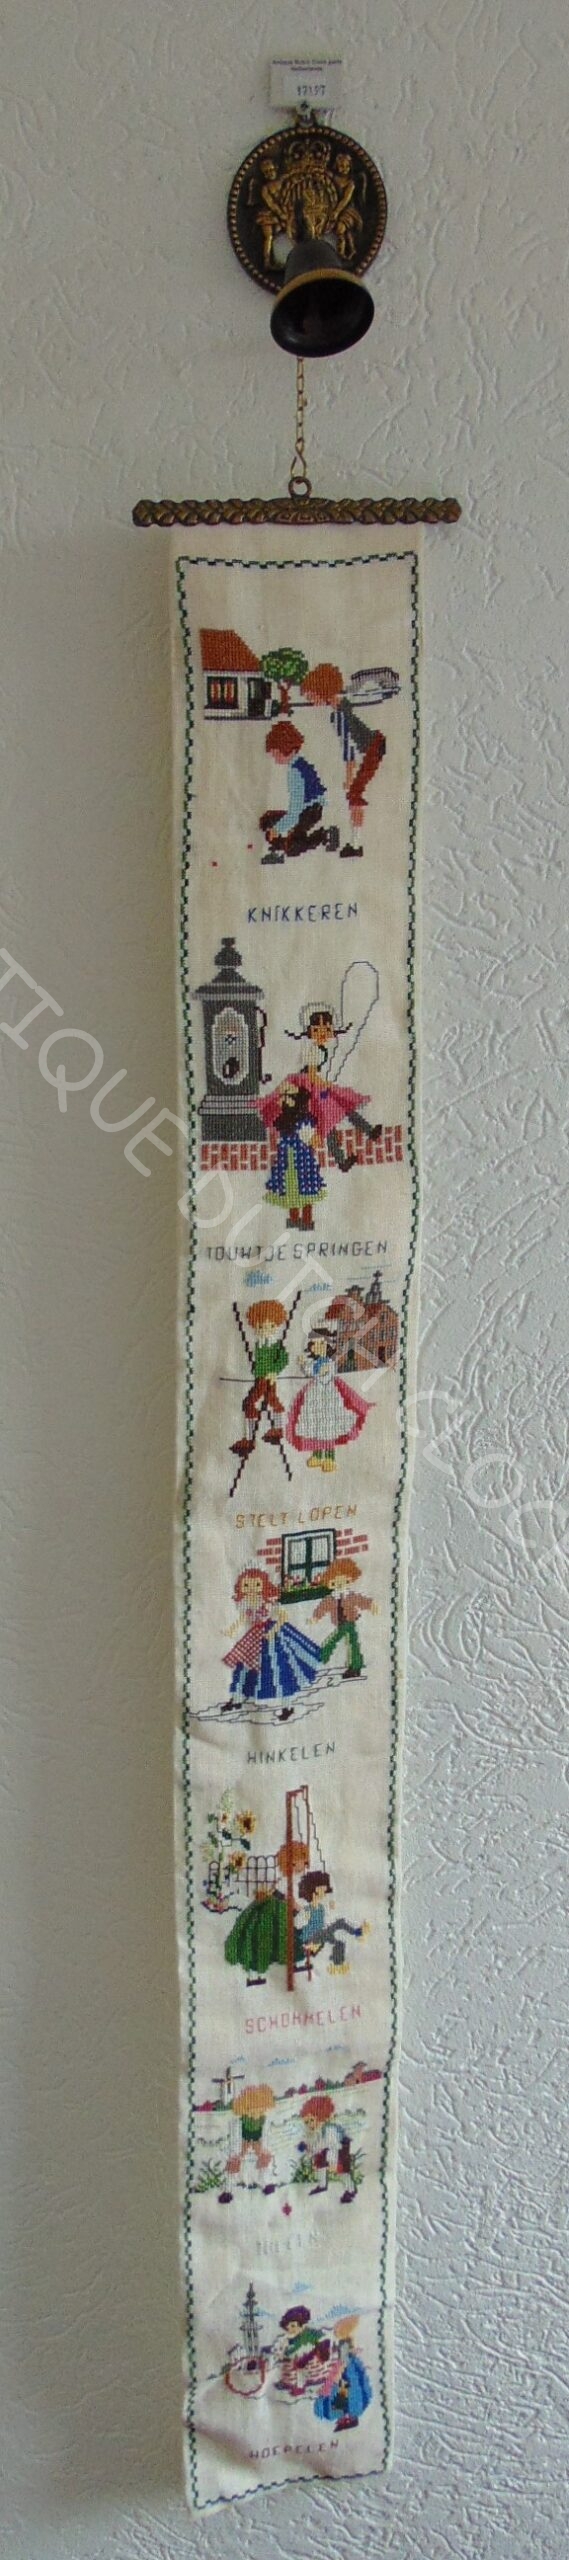 EMBROIDERED BELL PULL CORD OLD DUTCH KIDS GAMES NICE HARDWARE